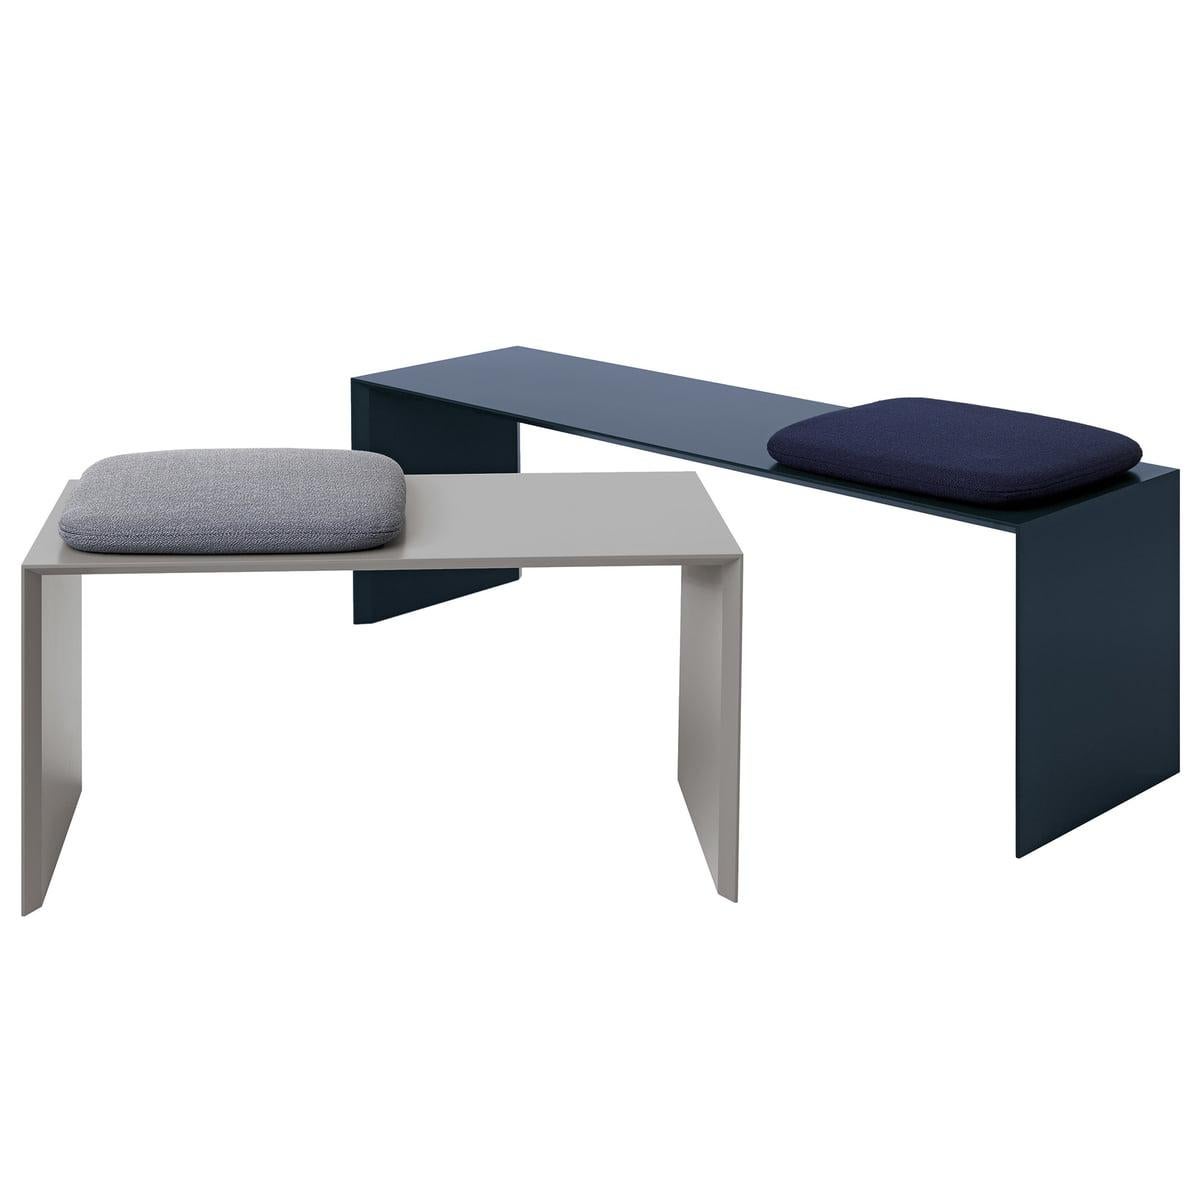 Bench
lacquered, also suitable as occasional table.
Available in three different sizes.
80,0 x 40,0 x 36,0
100,0 x 40,0 x 36,0
120,0 x 40,0 x 36,0
(Please order cushion 0685 and adjustable feet 0913 separately)
Clear highlight. The ADD ON